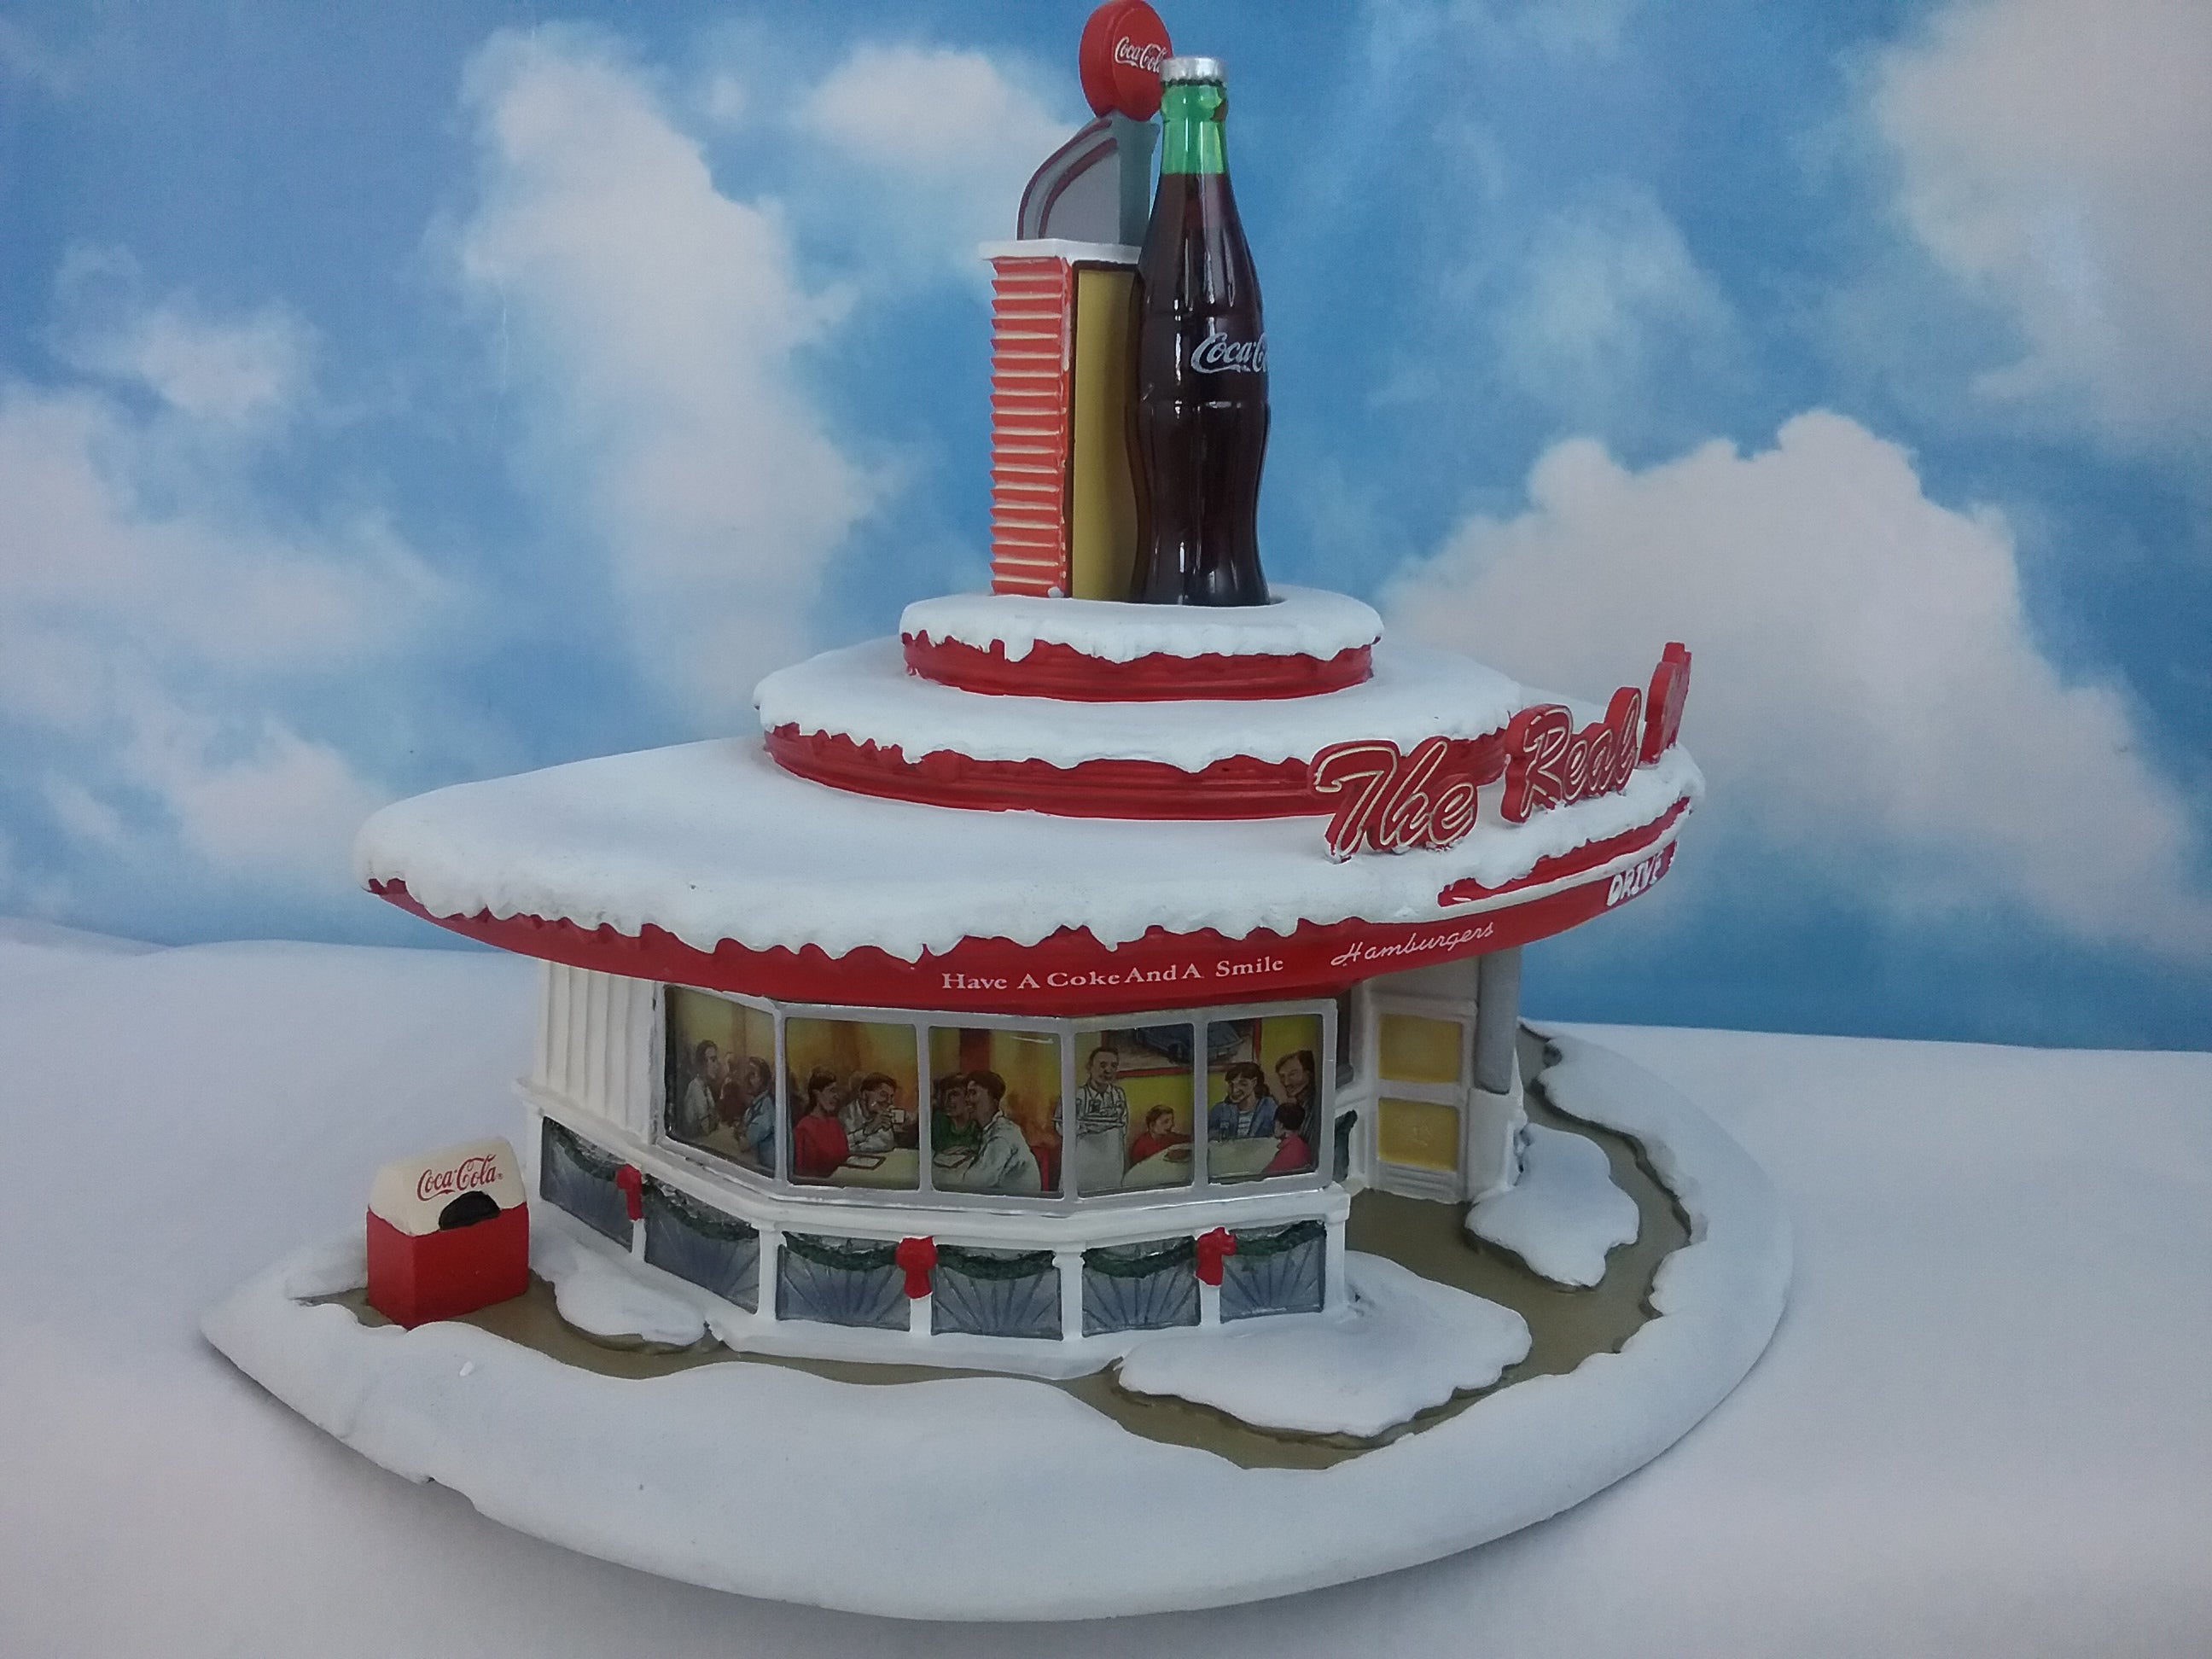 Coca-Cola "The Real Thing Drive-In"